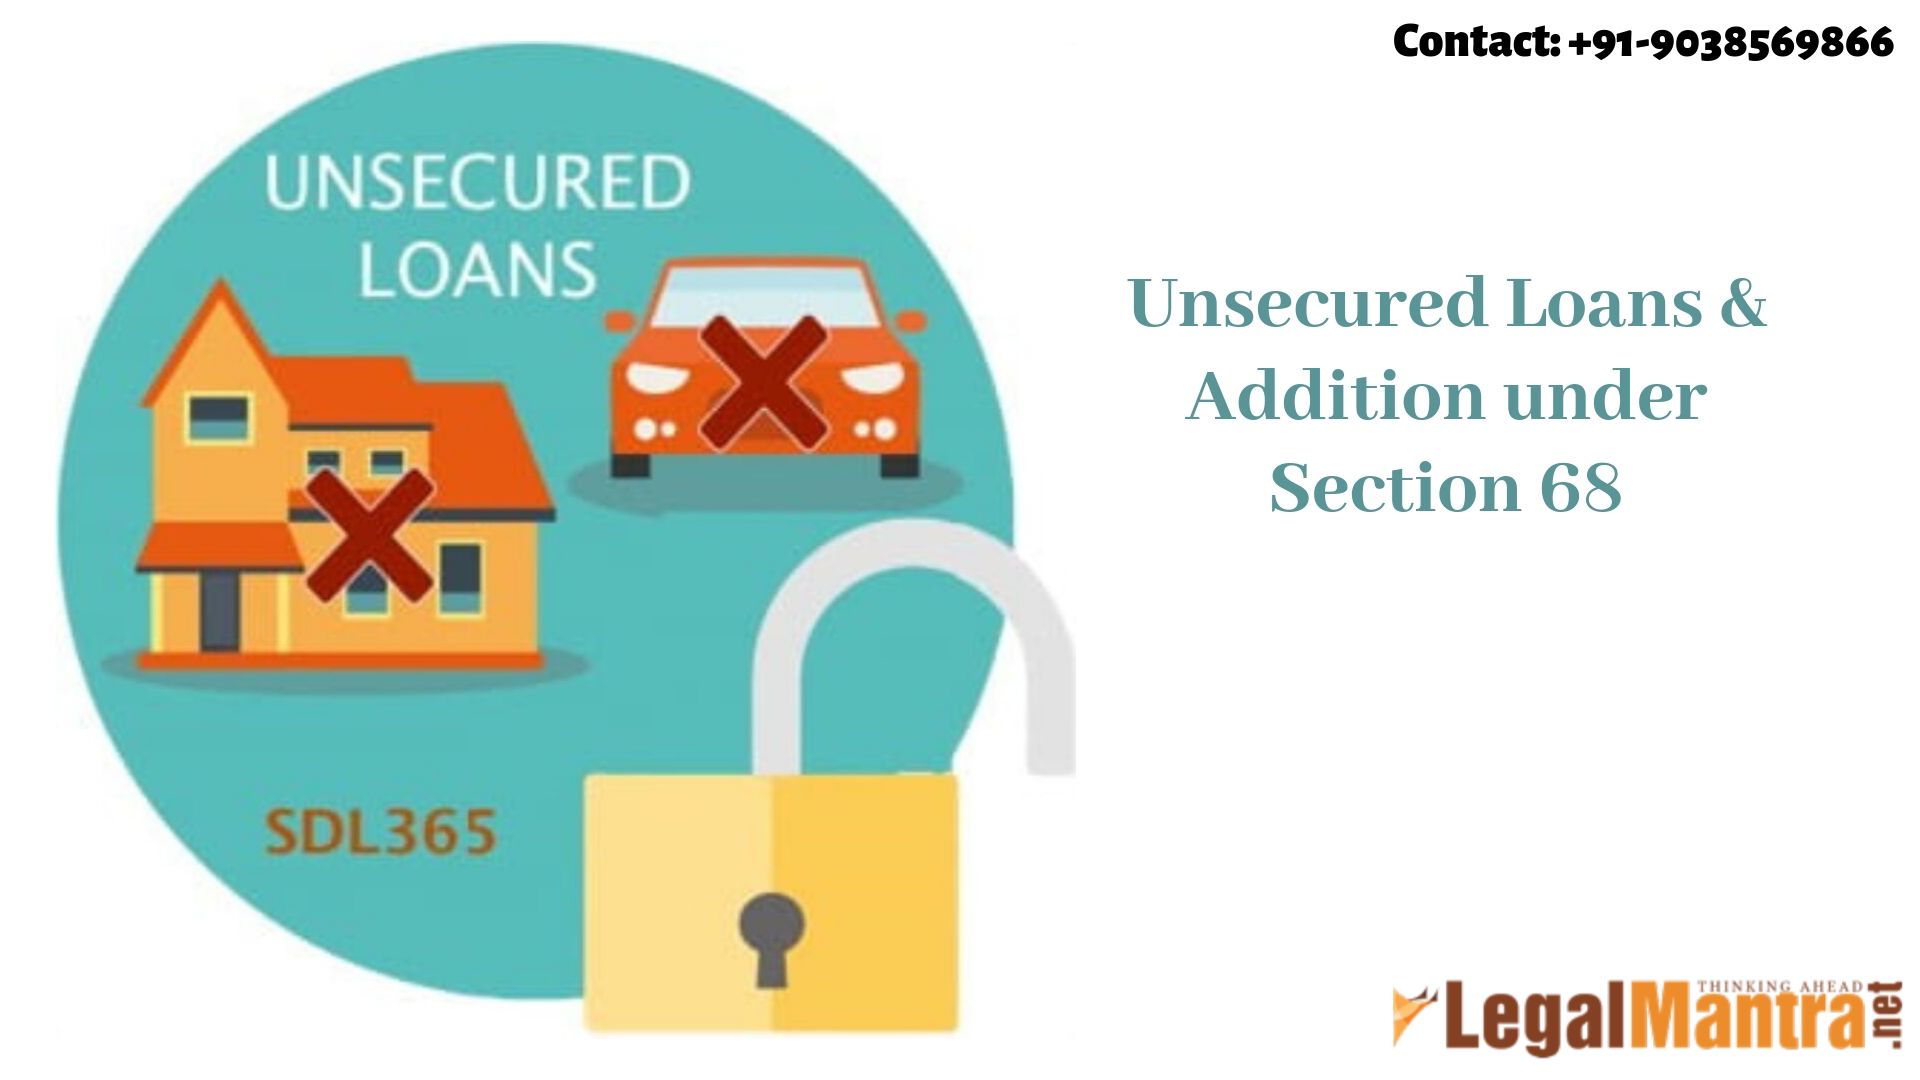 Unsecured loans & Addition under section 68